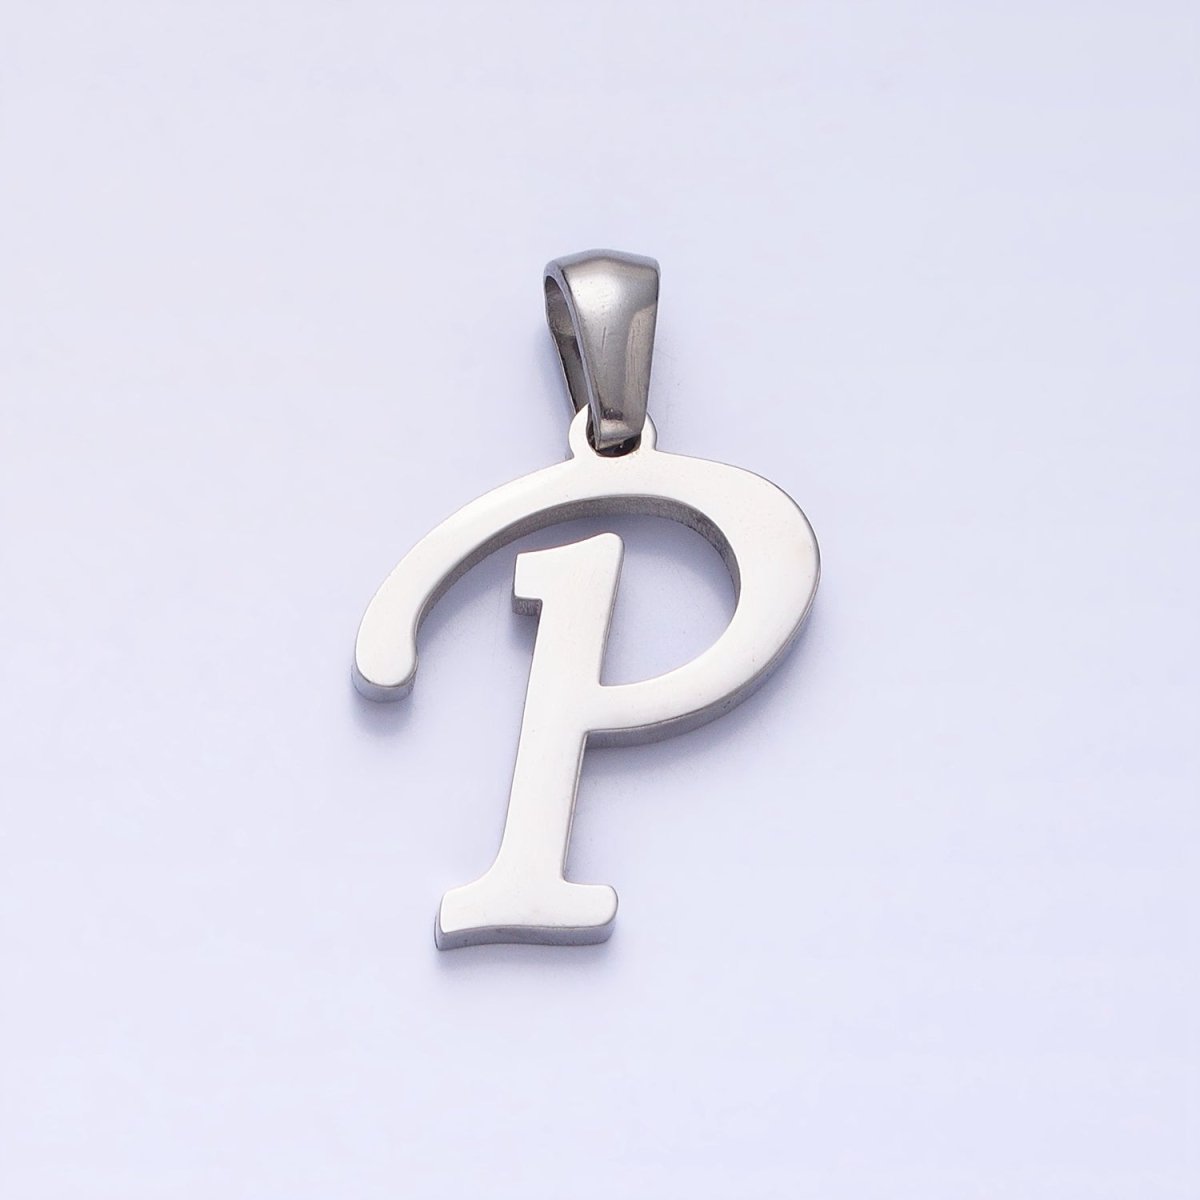 Stainless Steel Letter Charms, initial alphabet pendant DIY jewelry letter charms for personalized jewelry making AD175 - AD200 - DLUXCA